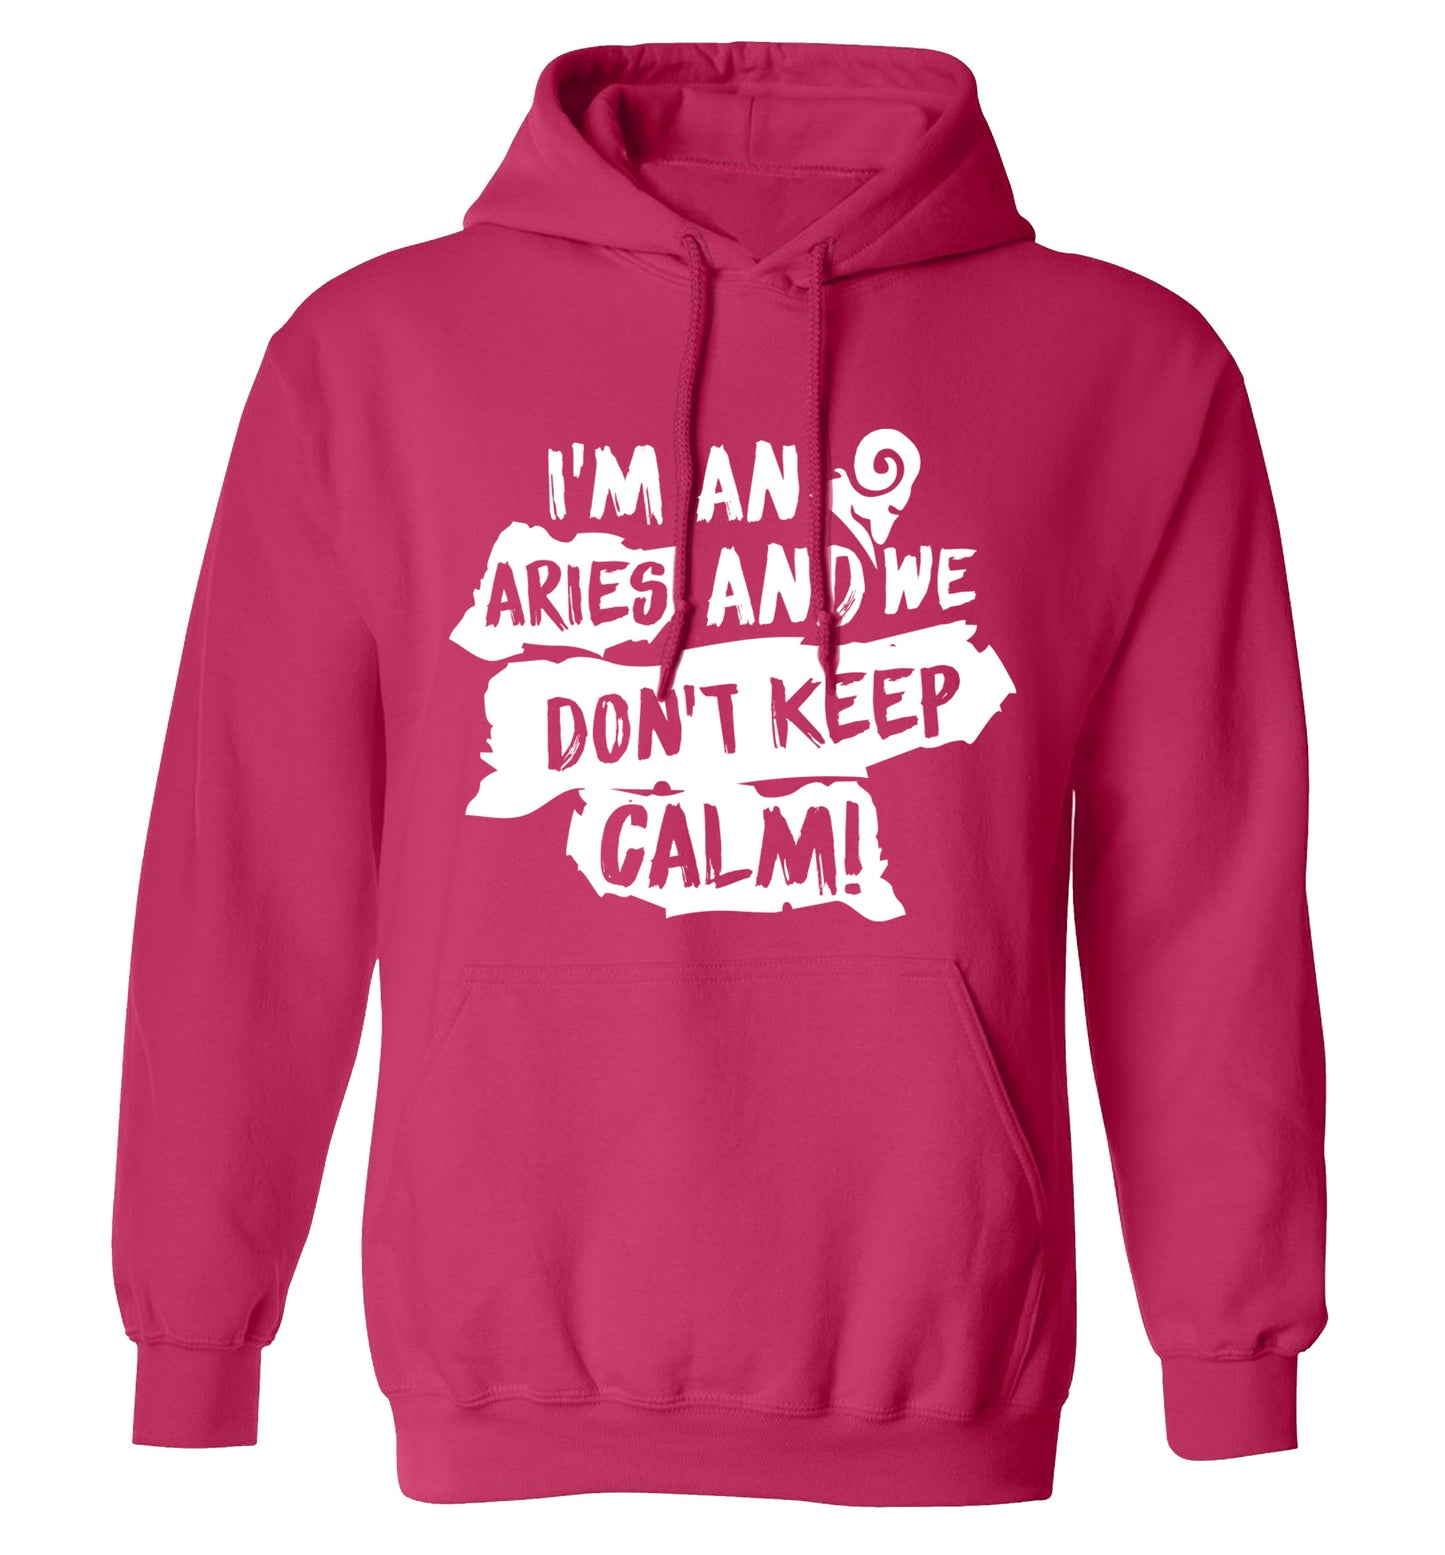 I'm an aries and we don't keep calm adults unisex pink hoodie 2XL